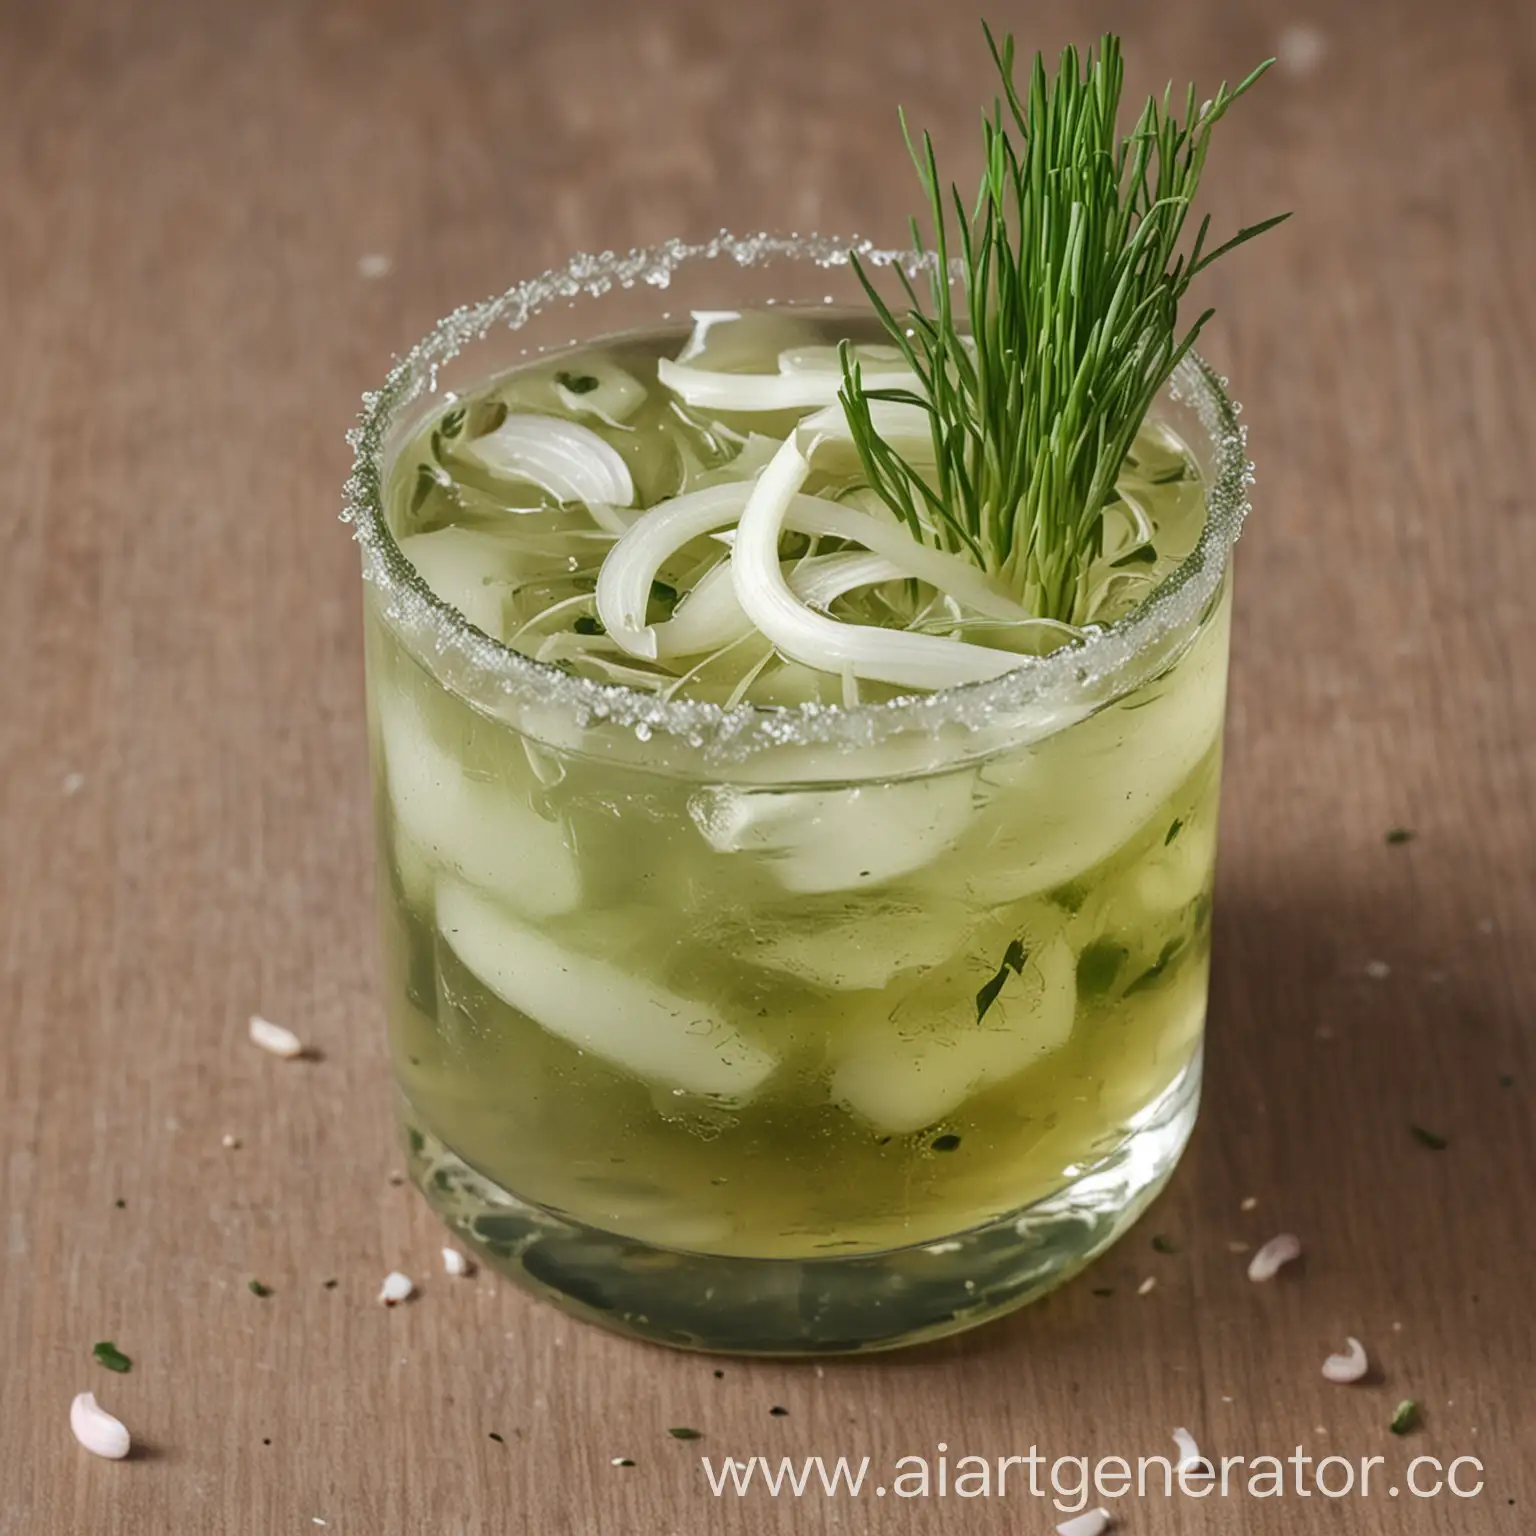 Pungent-Garlic-and-Onion-Cocktail-Recipe